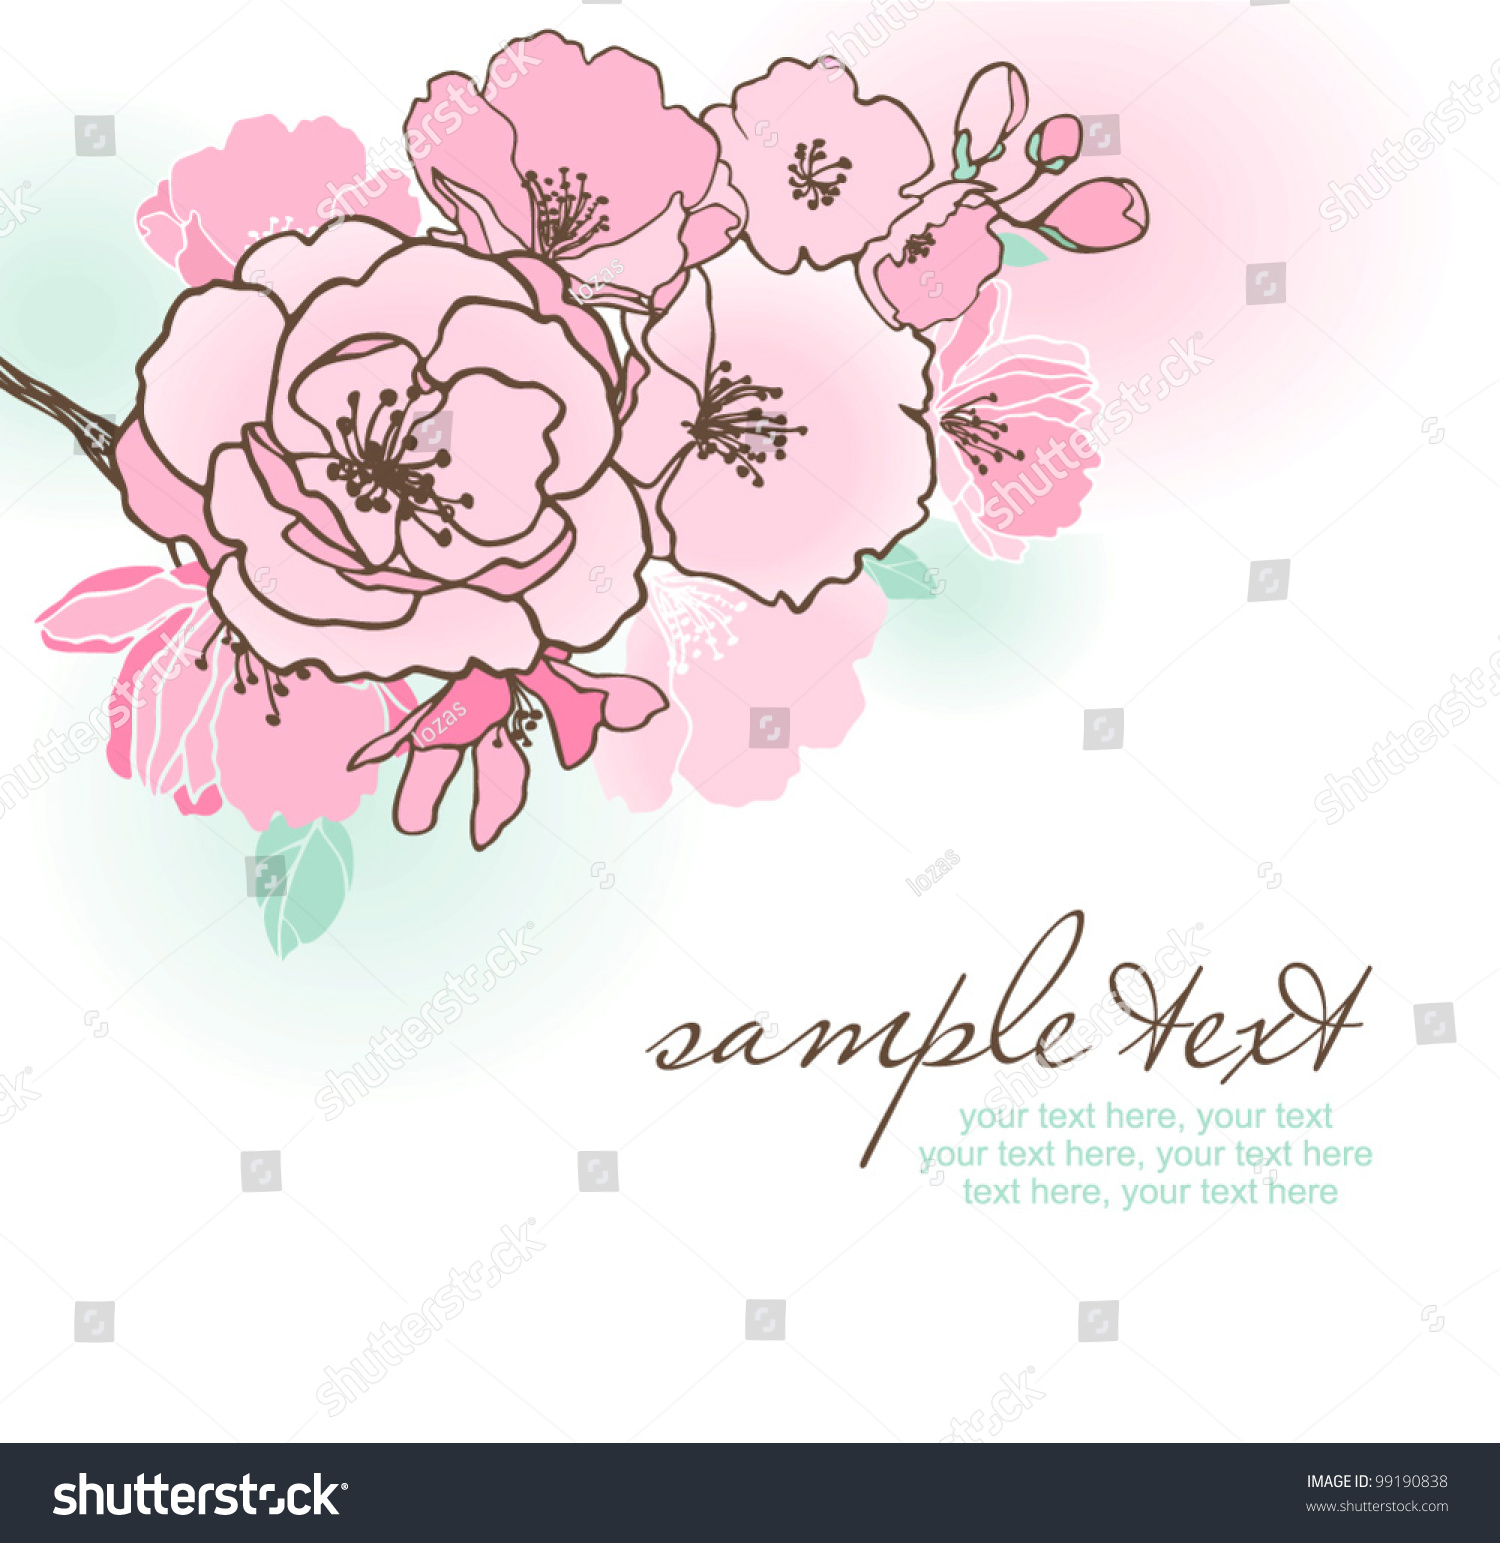 Vector Card Stylized Cherry Blossom Text Stock Vector 99190838 ...